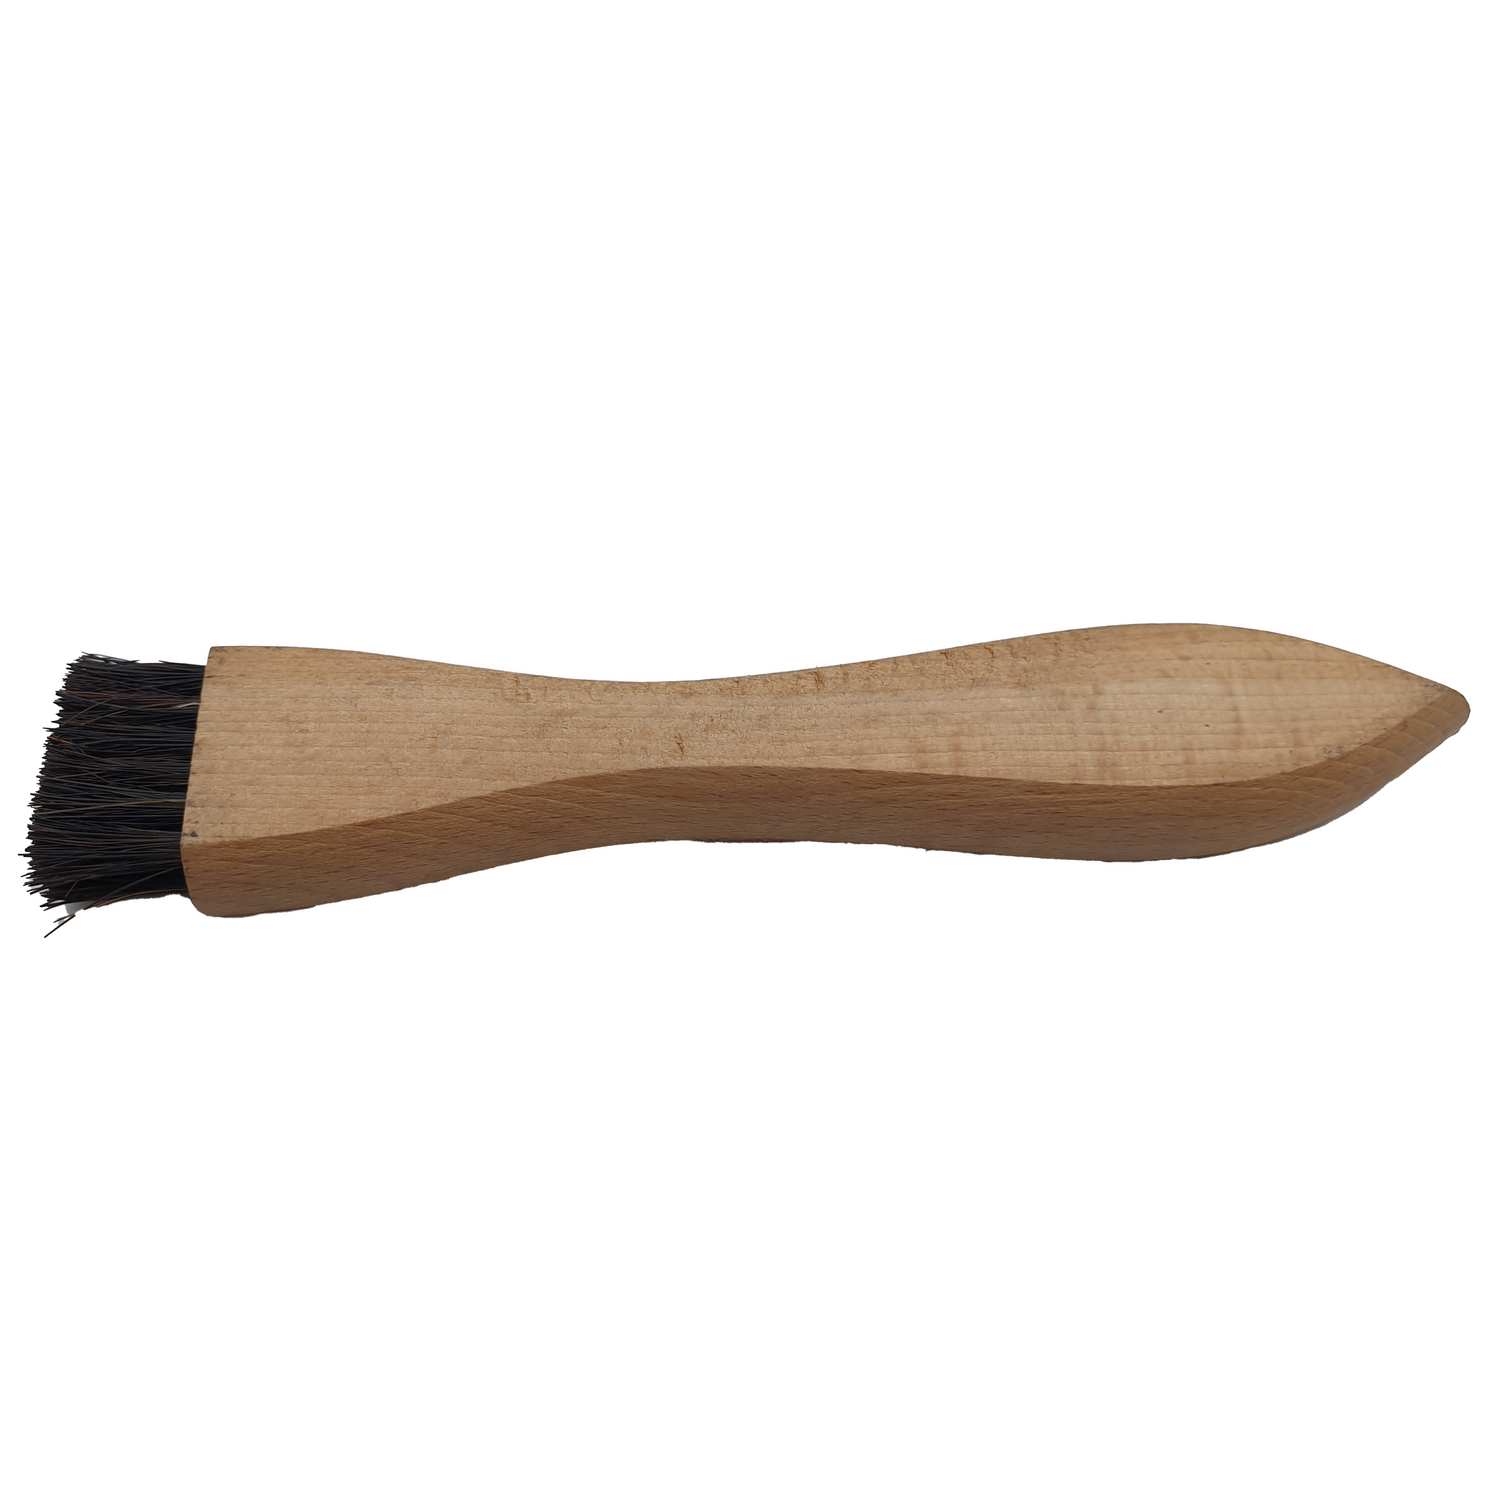 Techspray wooden handle general cleaning brush esd safe antistatic to clean and coat PCB